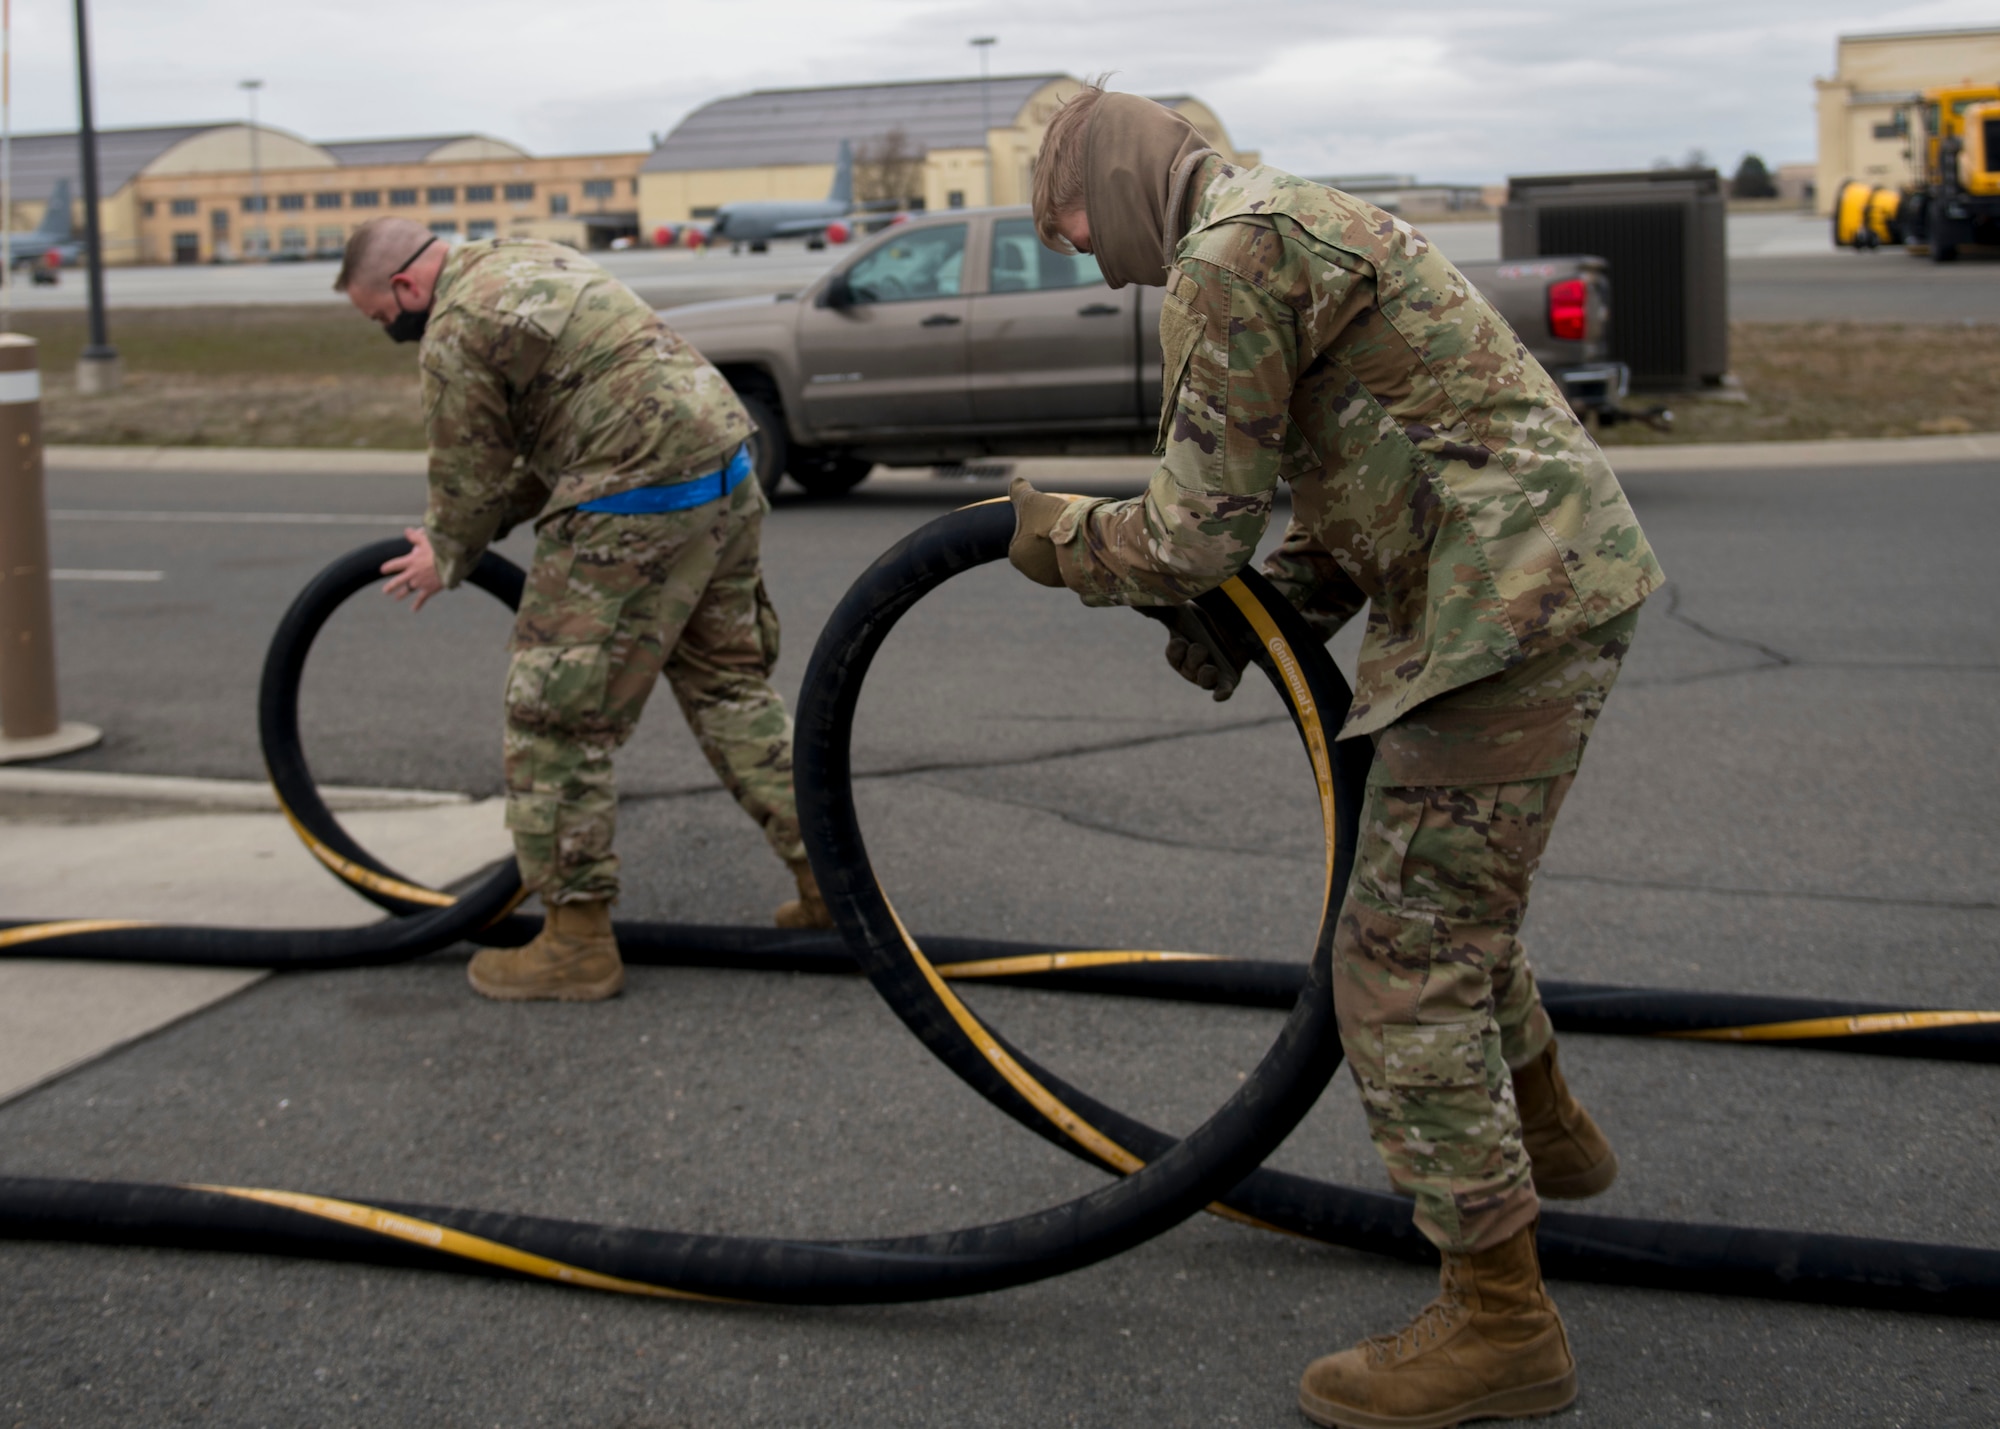 U.S. Air Force Airman 1st Class Spencer Miklos and Airman 1st Class Zachary Burns, 92nd Logistics Readiness Squadron fuels distribution operators, inspect hoses used to refuel aircraft prior to a fueling operation at Fairchild Air Force Base, Washington, March 15, 2021. The 92nd LRS fuels management flight’s mission is to verify the quality of all fuel that comes in and out of the base to ensure the 92nd Air Refueling Wing is always mission ready. (U.S. Air Force photo by Senior Airman Lawrence Sena)